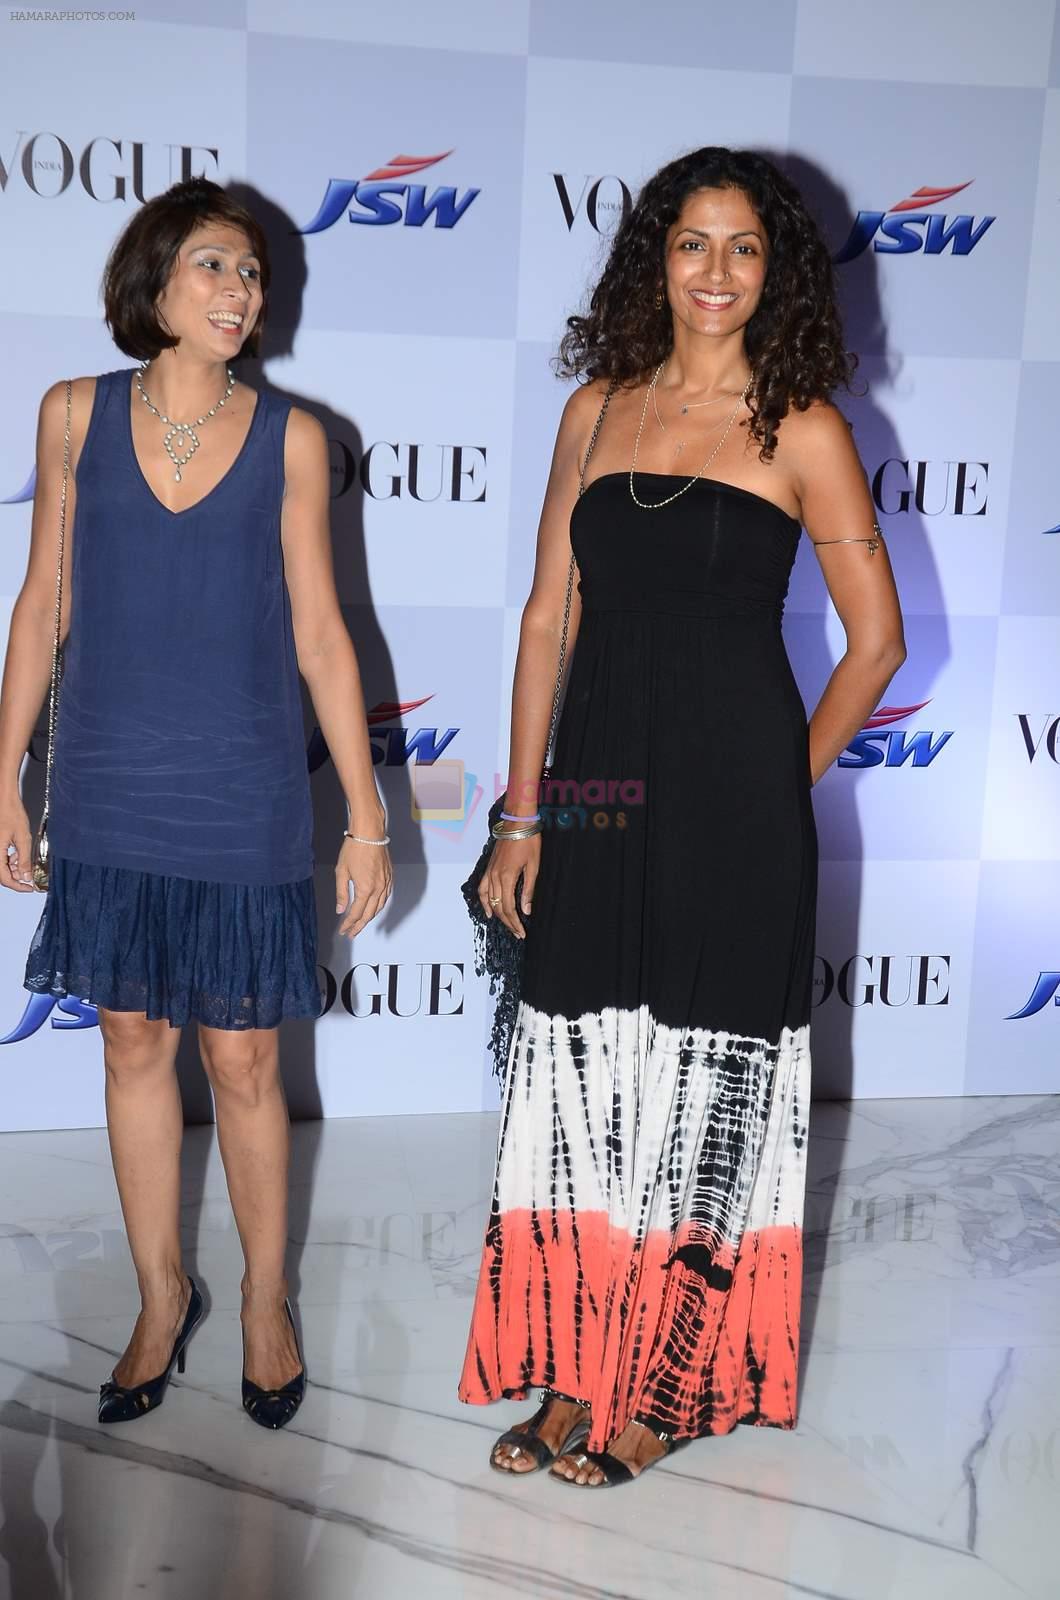 at My Choice film by Vogue in Bandra, Mumbai on 28th March 2015